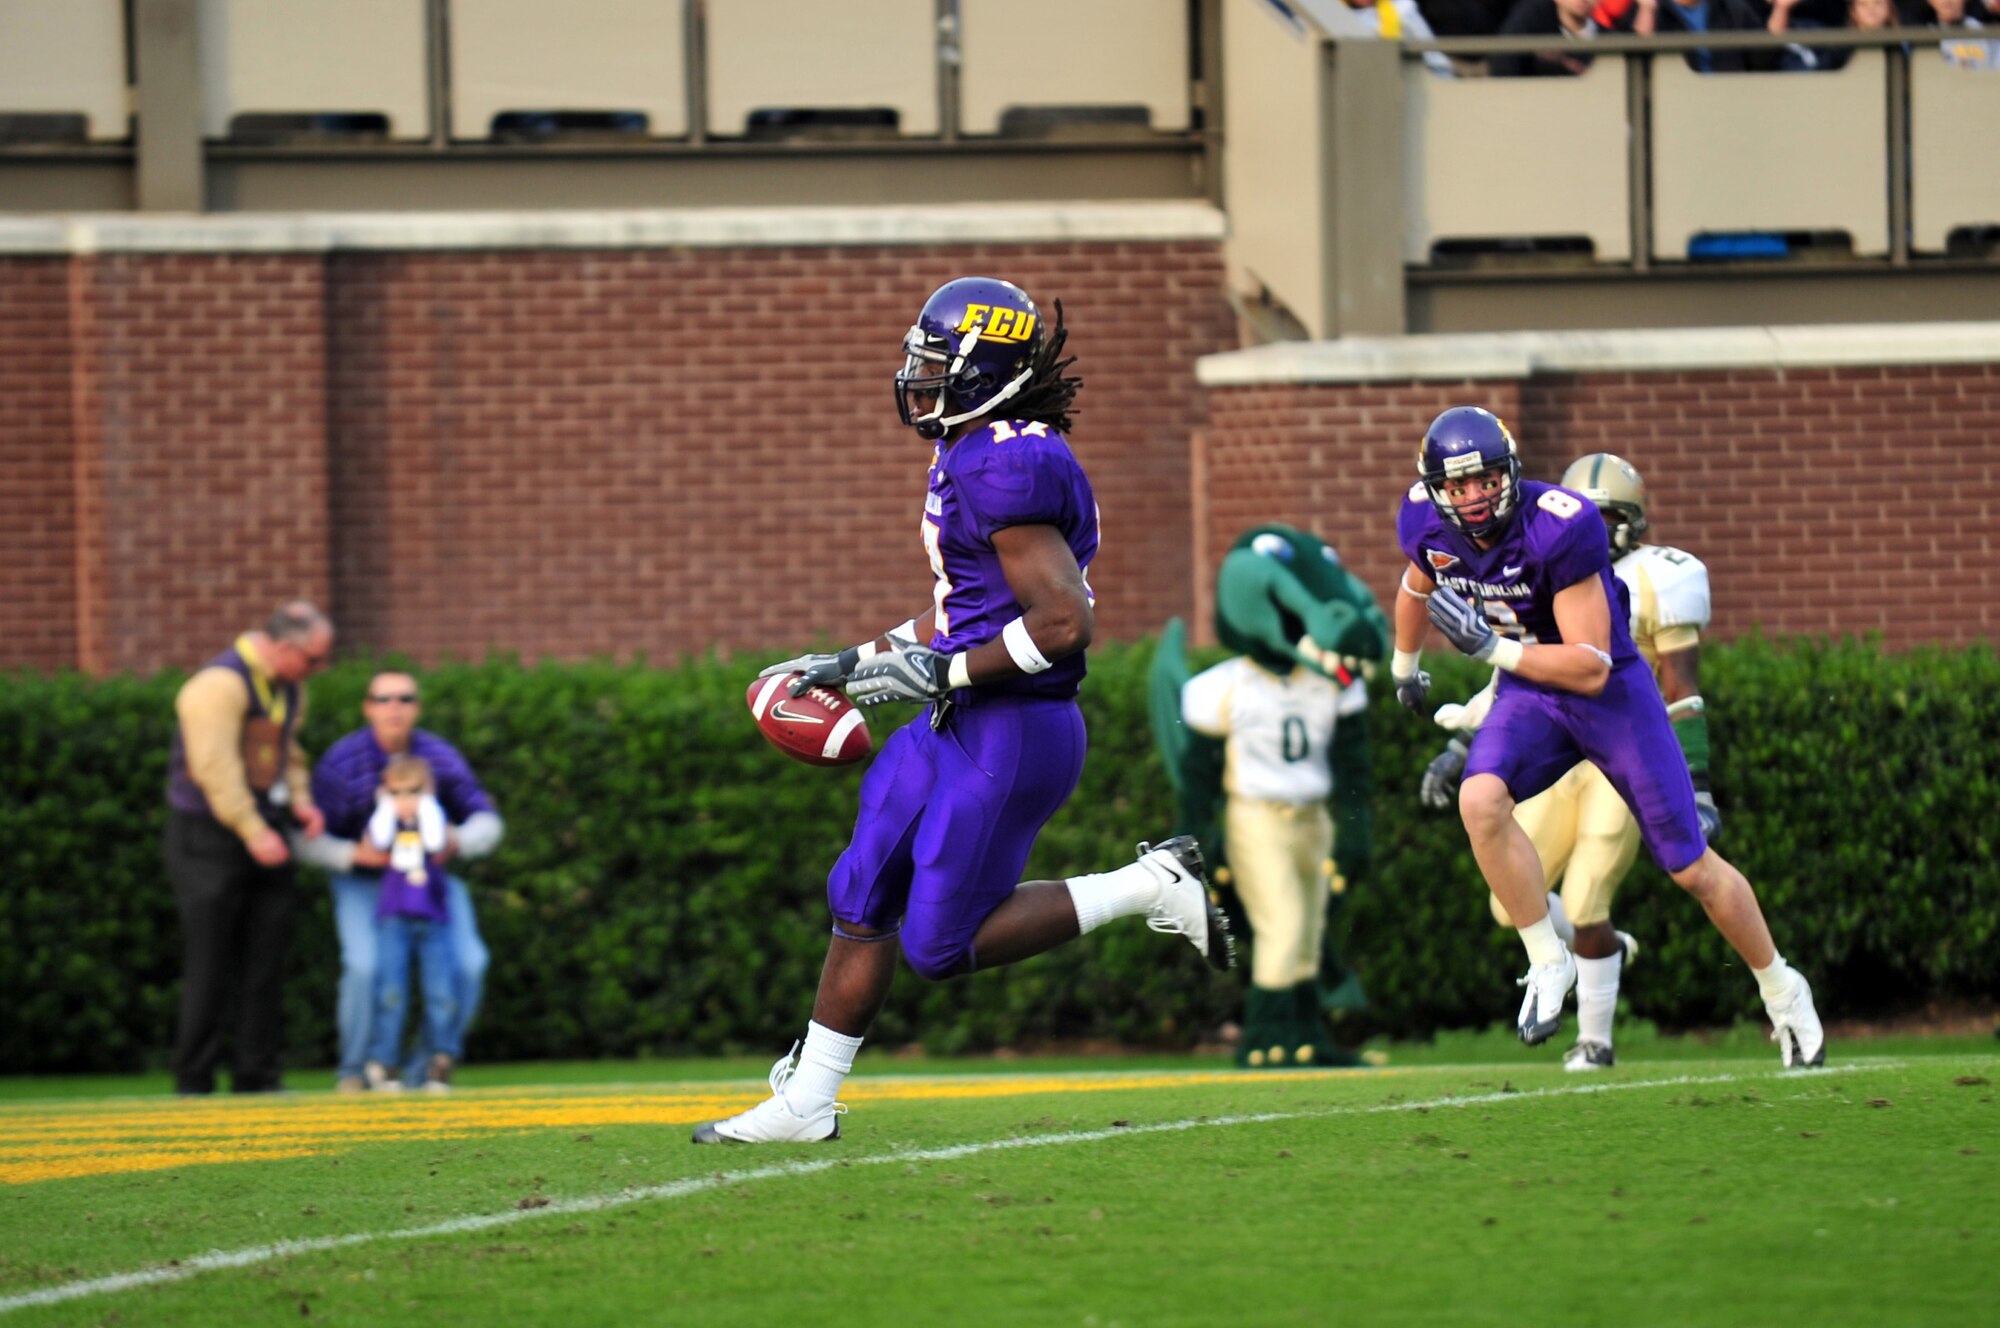 Dwayne Harris, East Carolina University wide receiver, scores the first touchdown of the game on a 23-yard pass from quarterback Pat Pinkney at the ECU Dowdy-Ficklen Stadium, Greenville, N.C., Nov. 21, 2009. ECU staff and students invited active-duty military members to the game to thank them for their service. (U.S. Air Force photo/Airman 1st Class Rae Perry) 